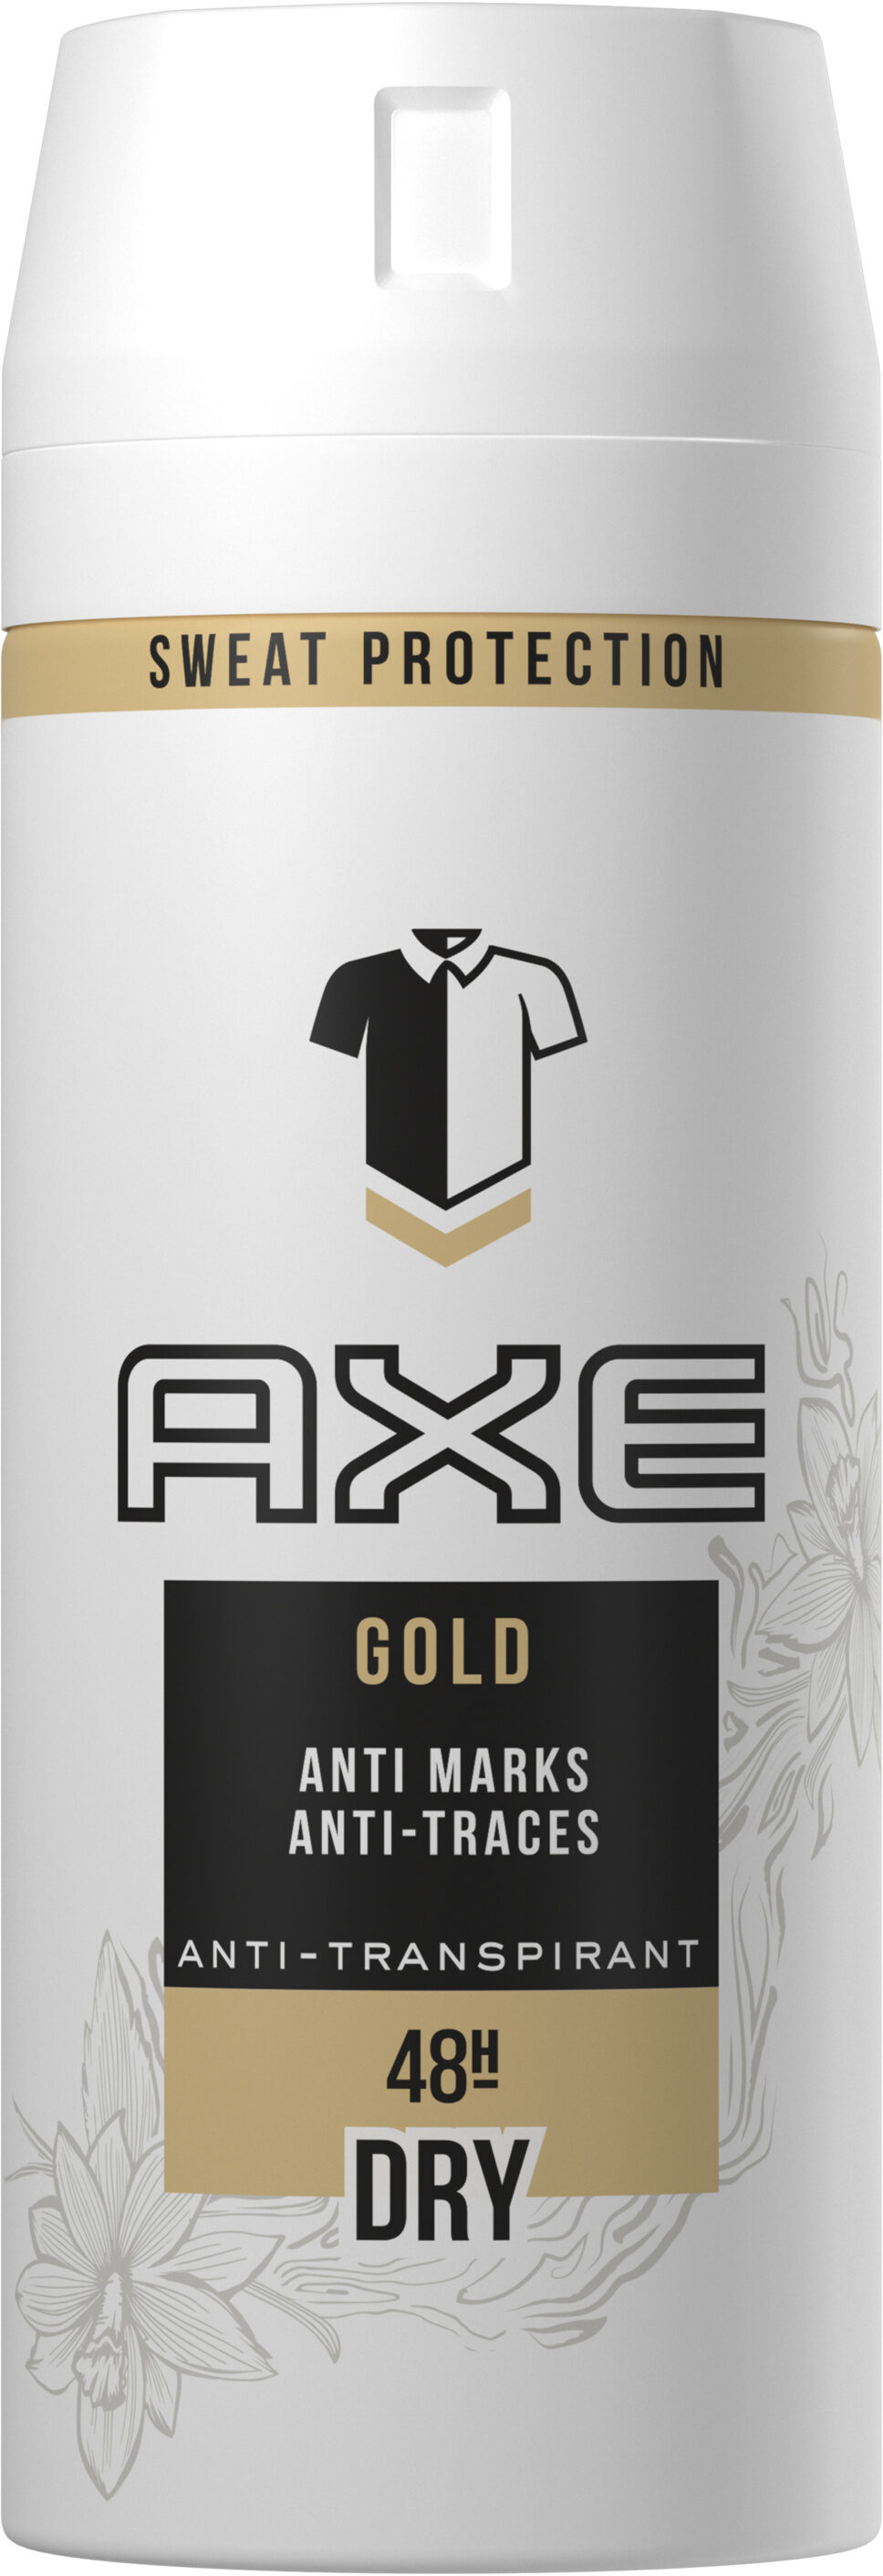 AXE Gold Déodorant Homme Spray Antibactérien Dry Anti-Traces Protection 48H - Product - fr